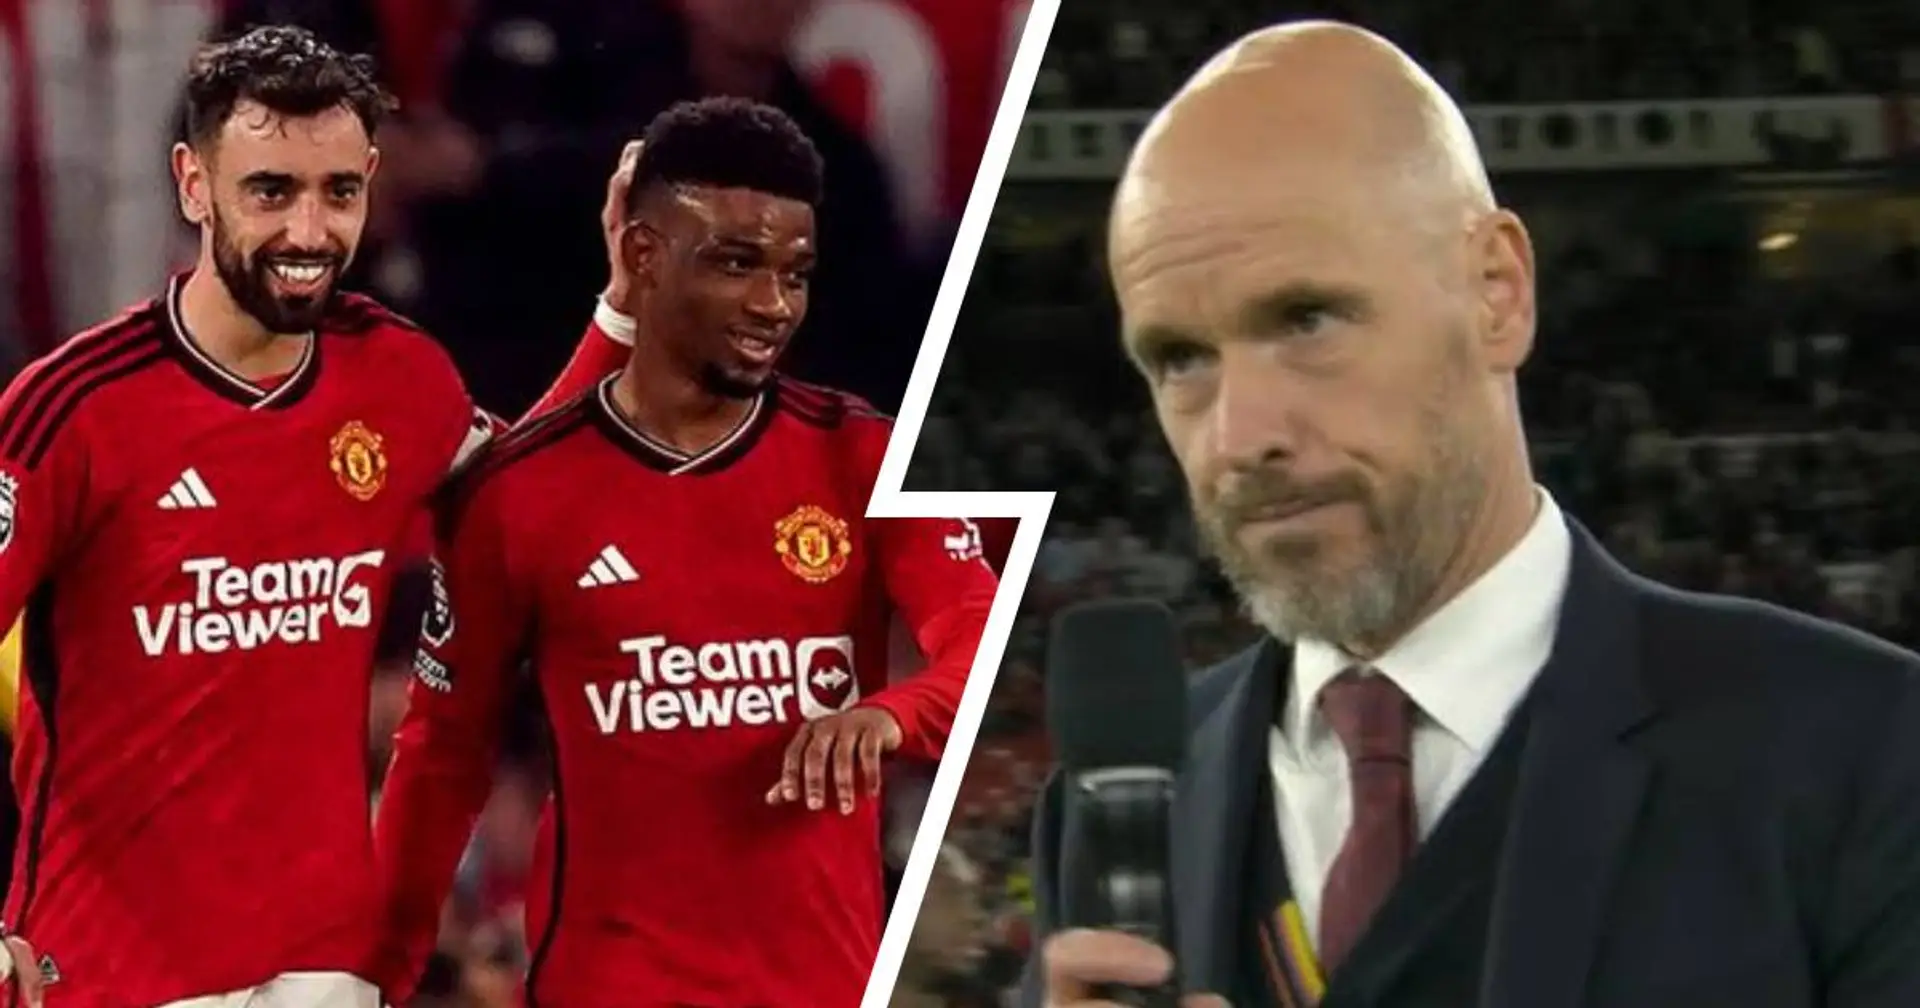 'Not the right time to talk': Ten Hag refuses to discuss Man United future after Newcastle win